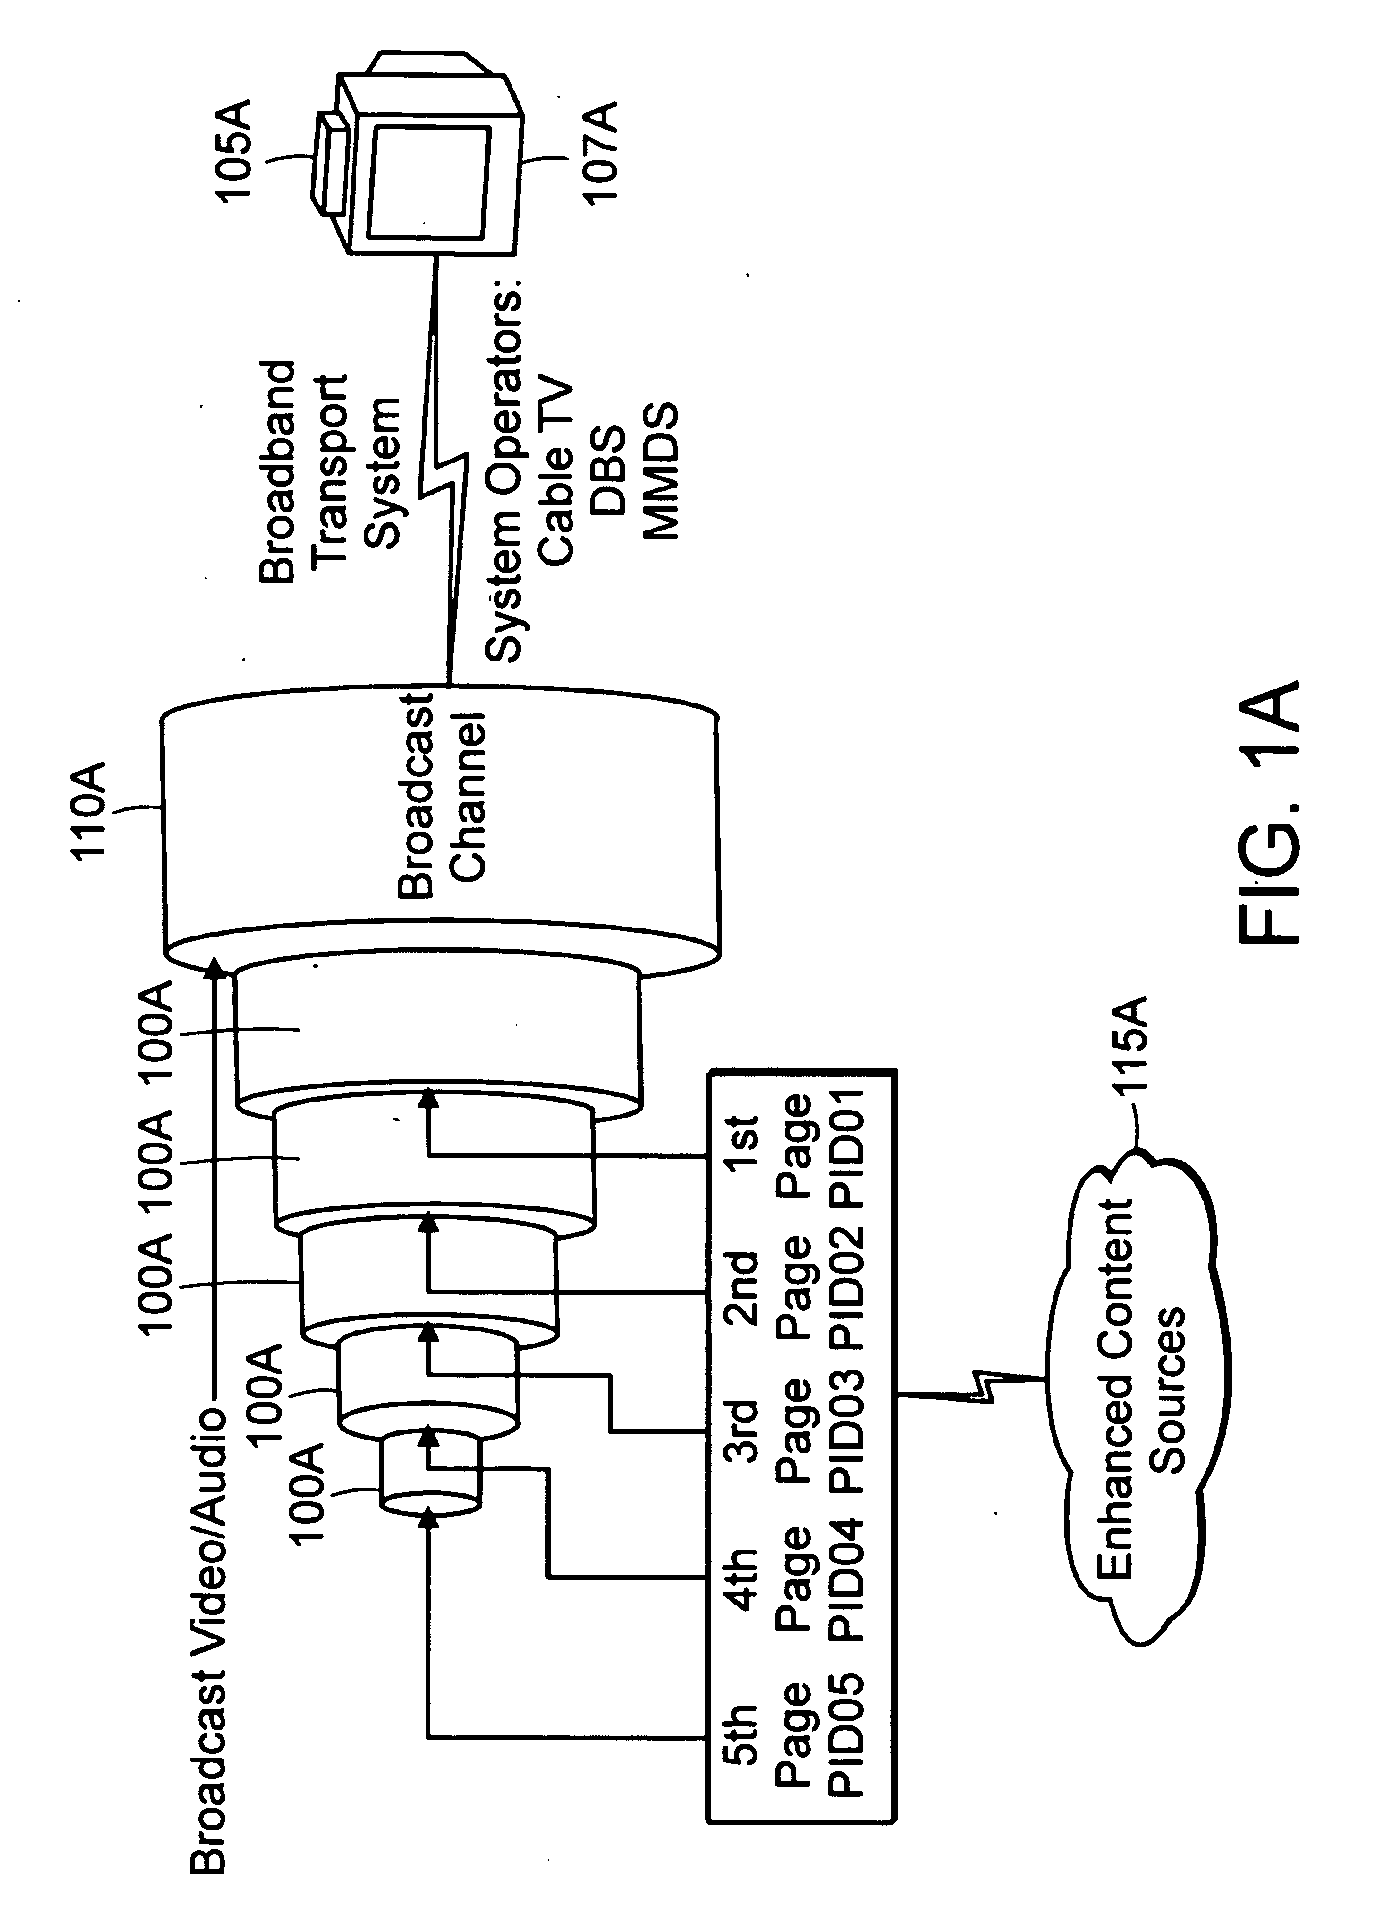 Method for Bandwidth Regulation on a Cable Television System Channel